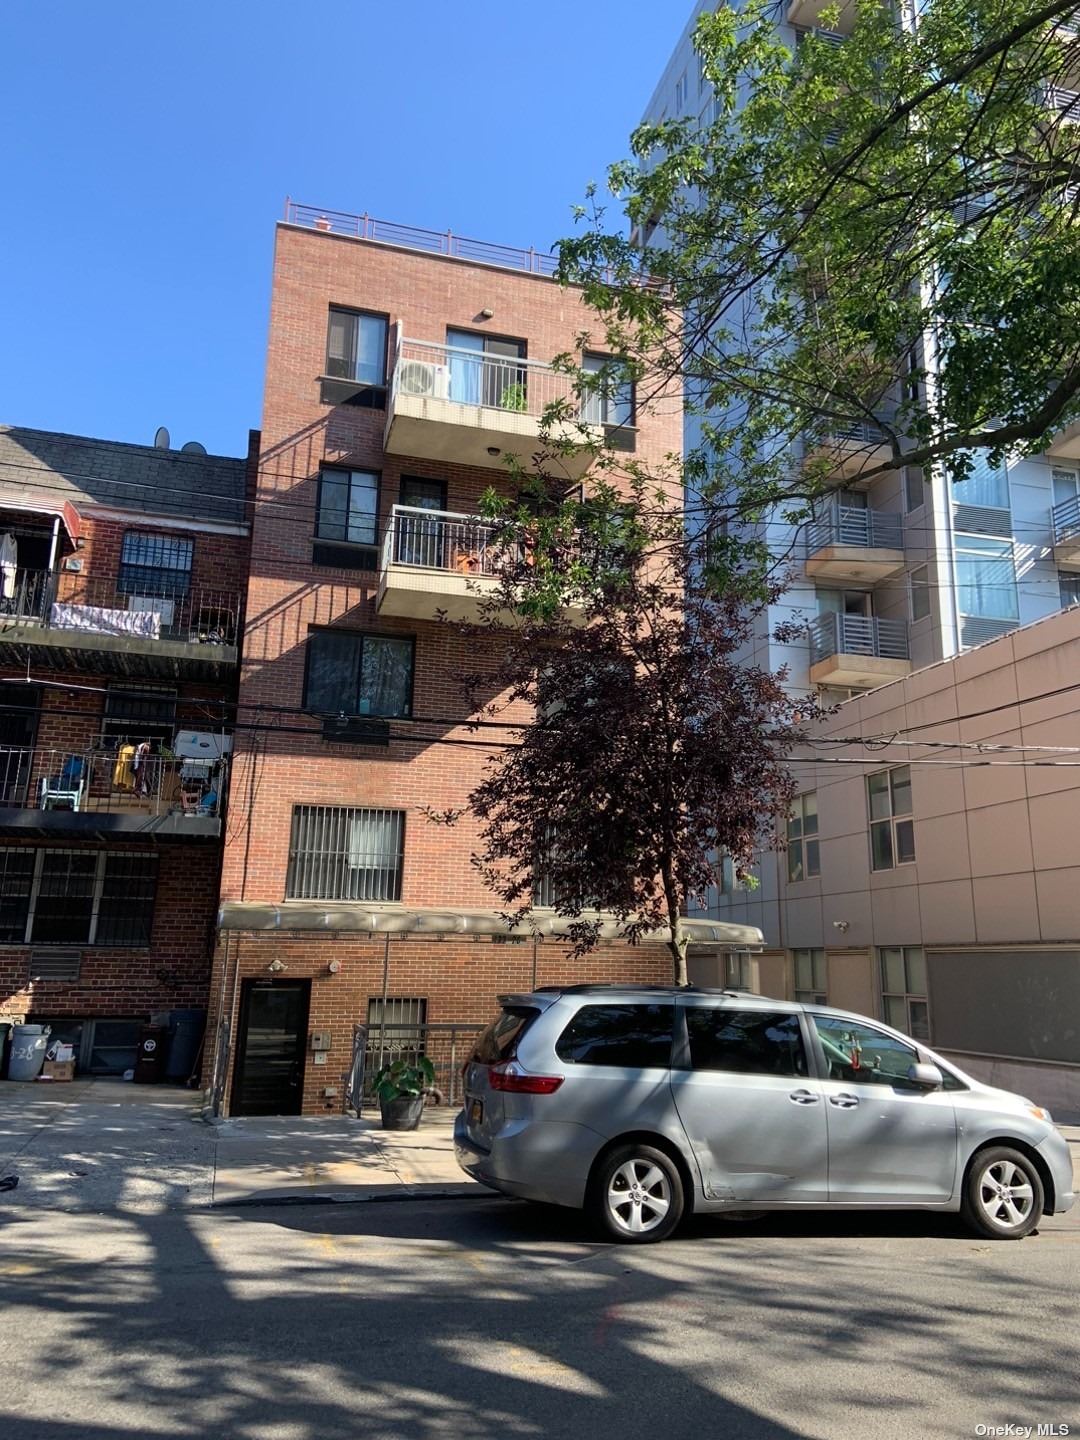 Condo in Flushing - Avery  Queens, NY 11355